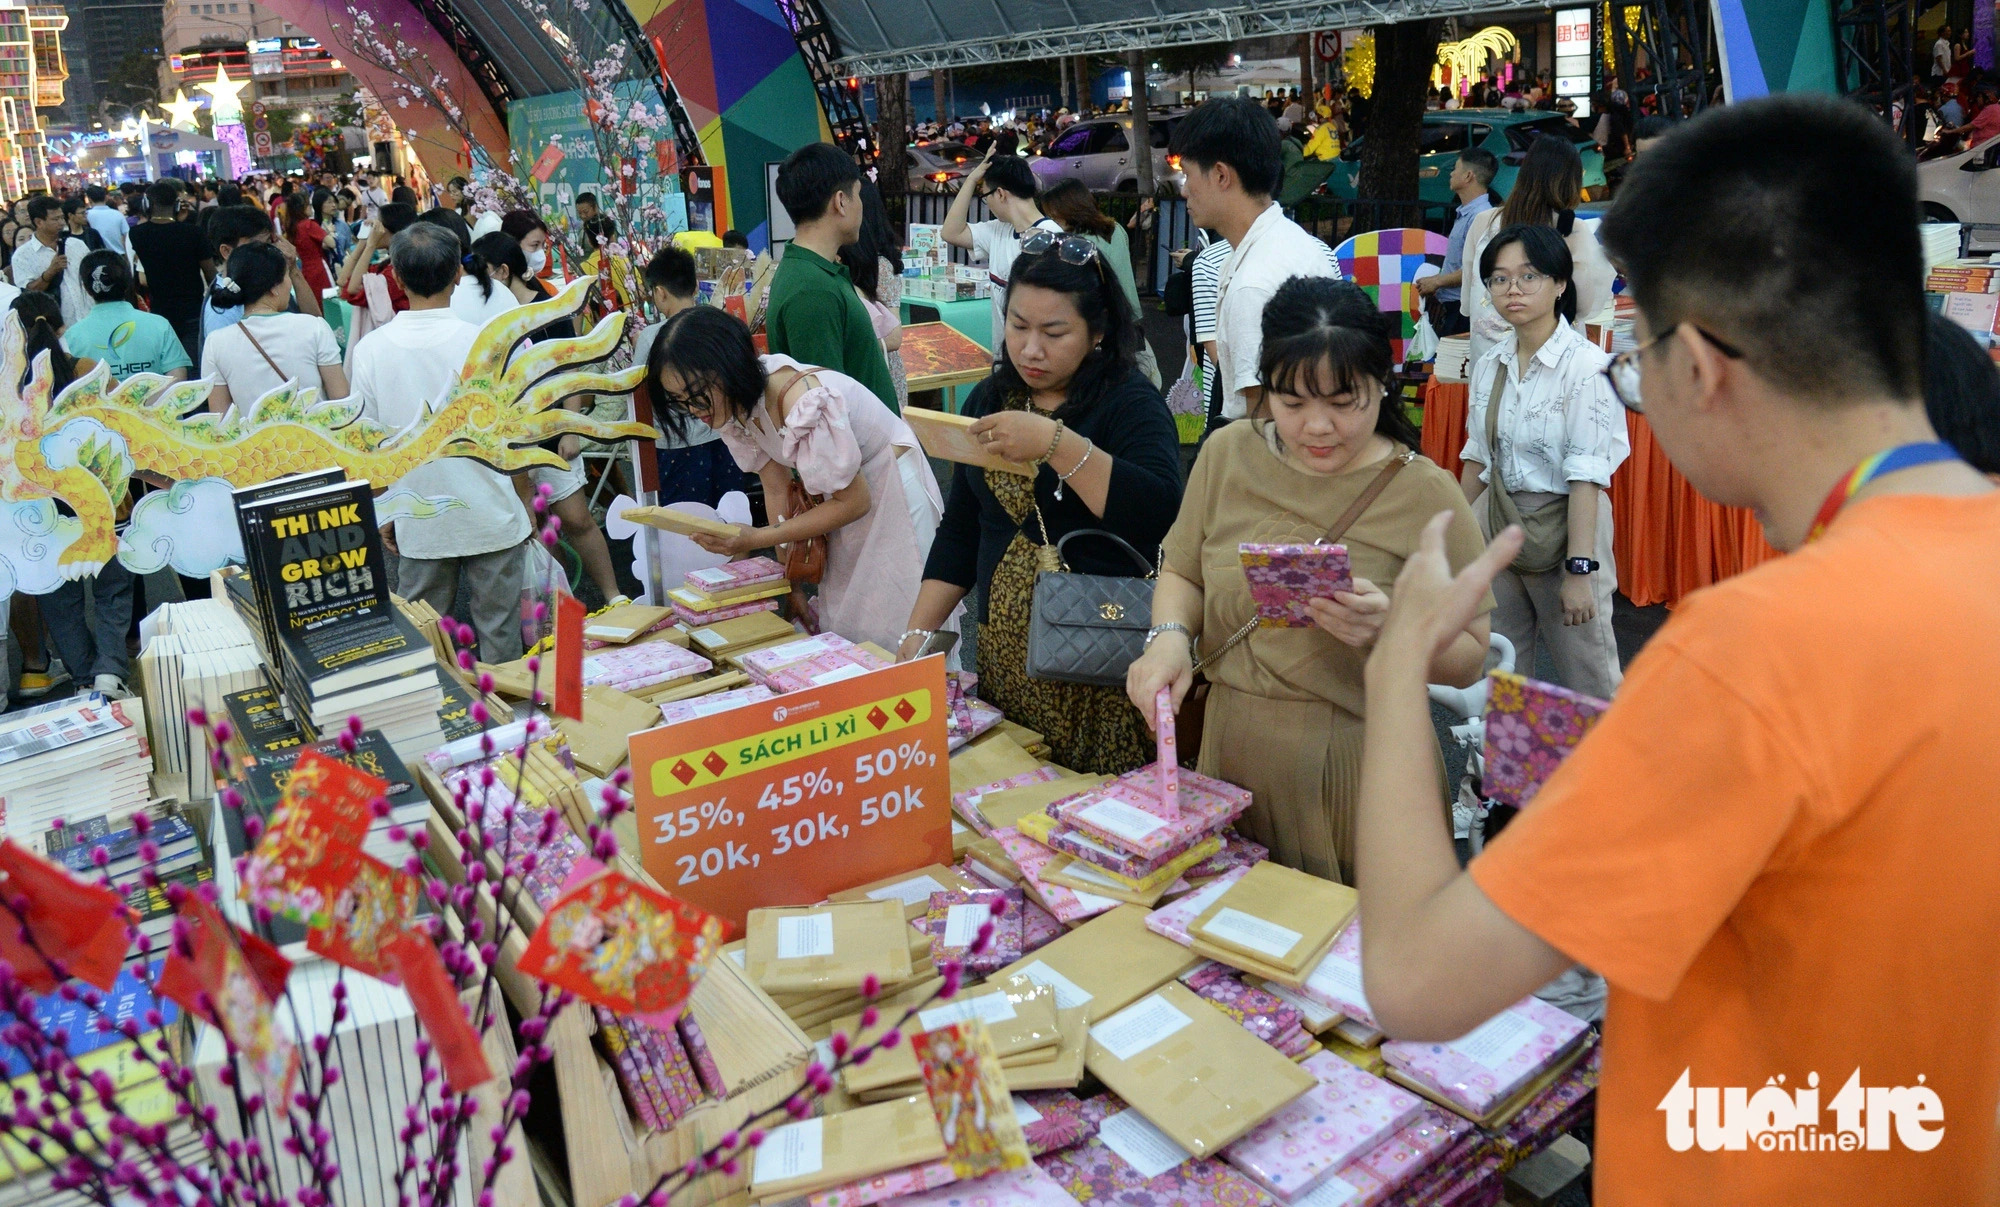 Revelers gather at a booth giving away books as Tet gifts. Photo: Tu Trung / Tuoi Tre